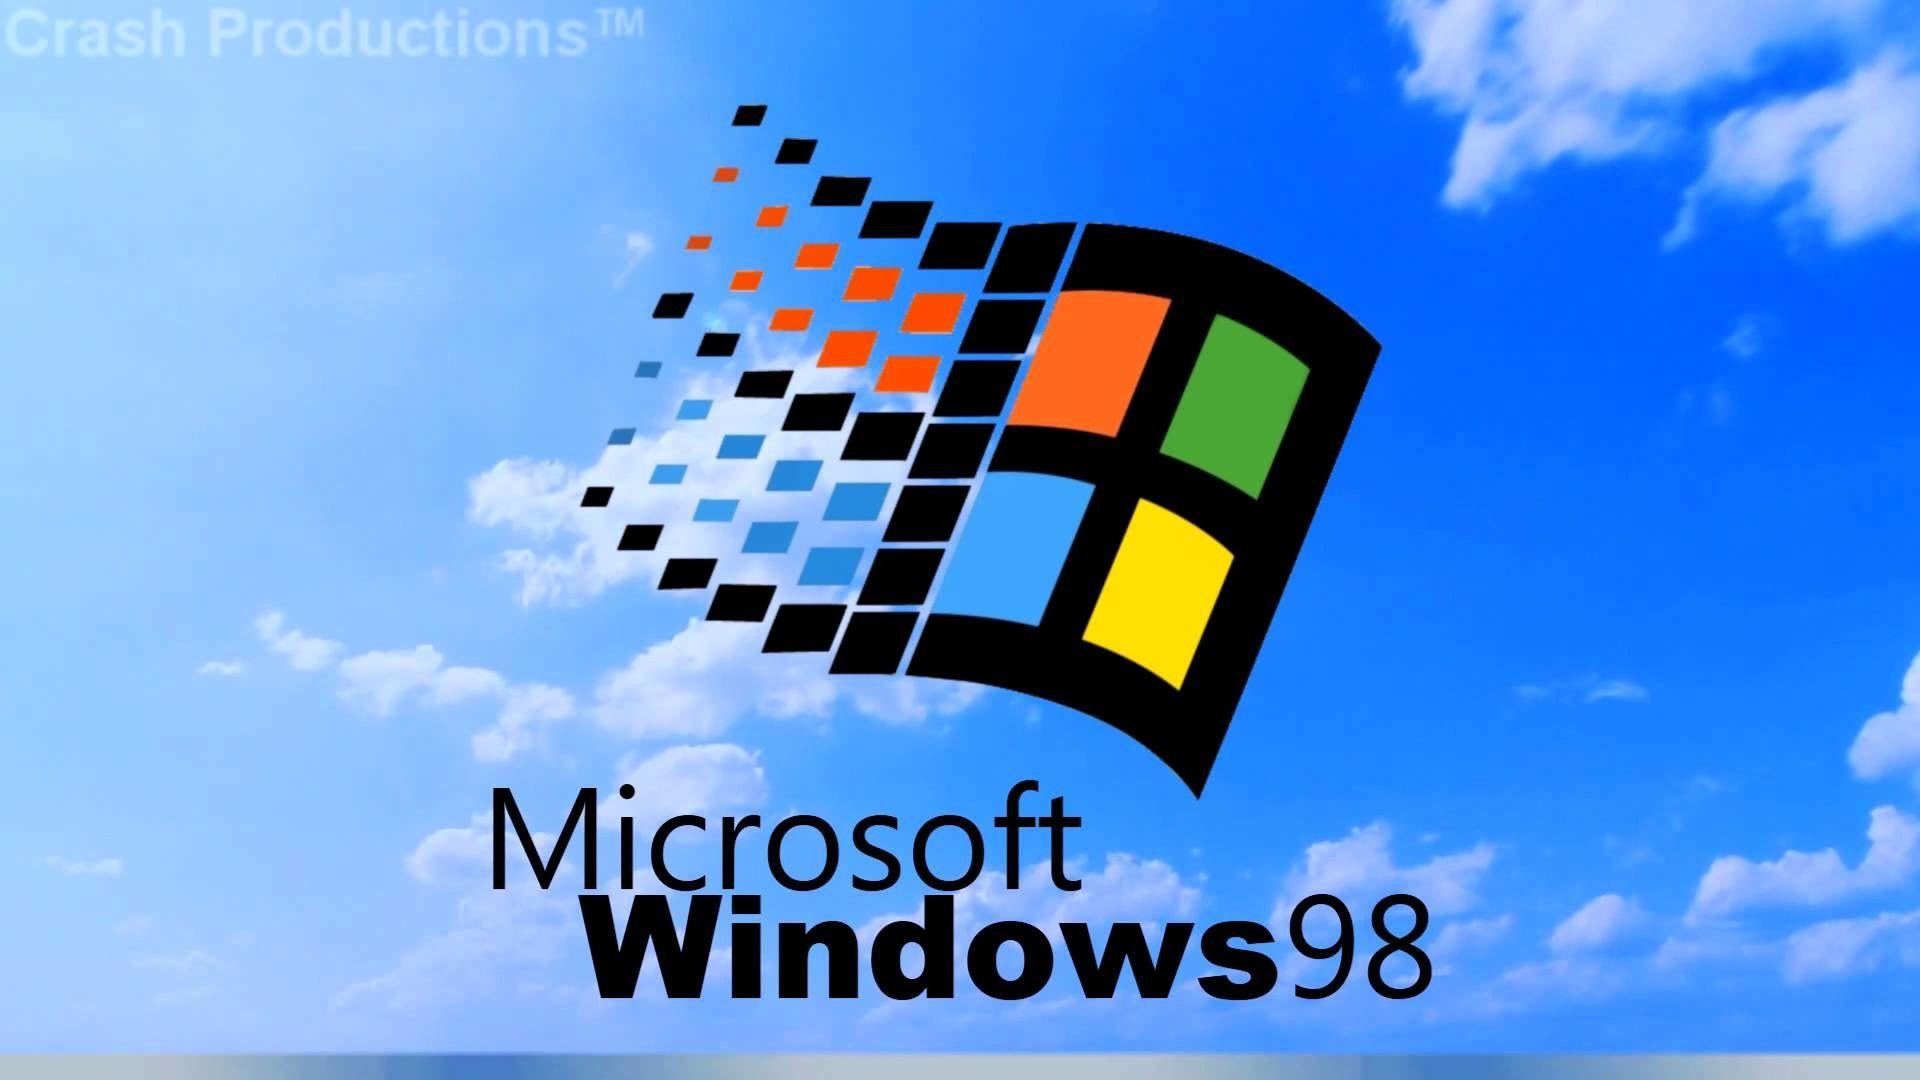 Windows 98 Wallpaper 1080p Hdl Living Learning Images, Photos, Reviews